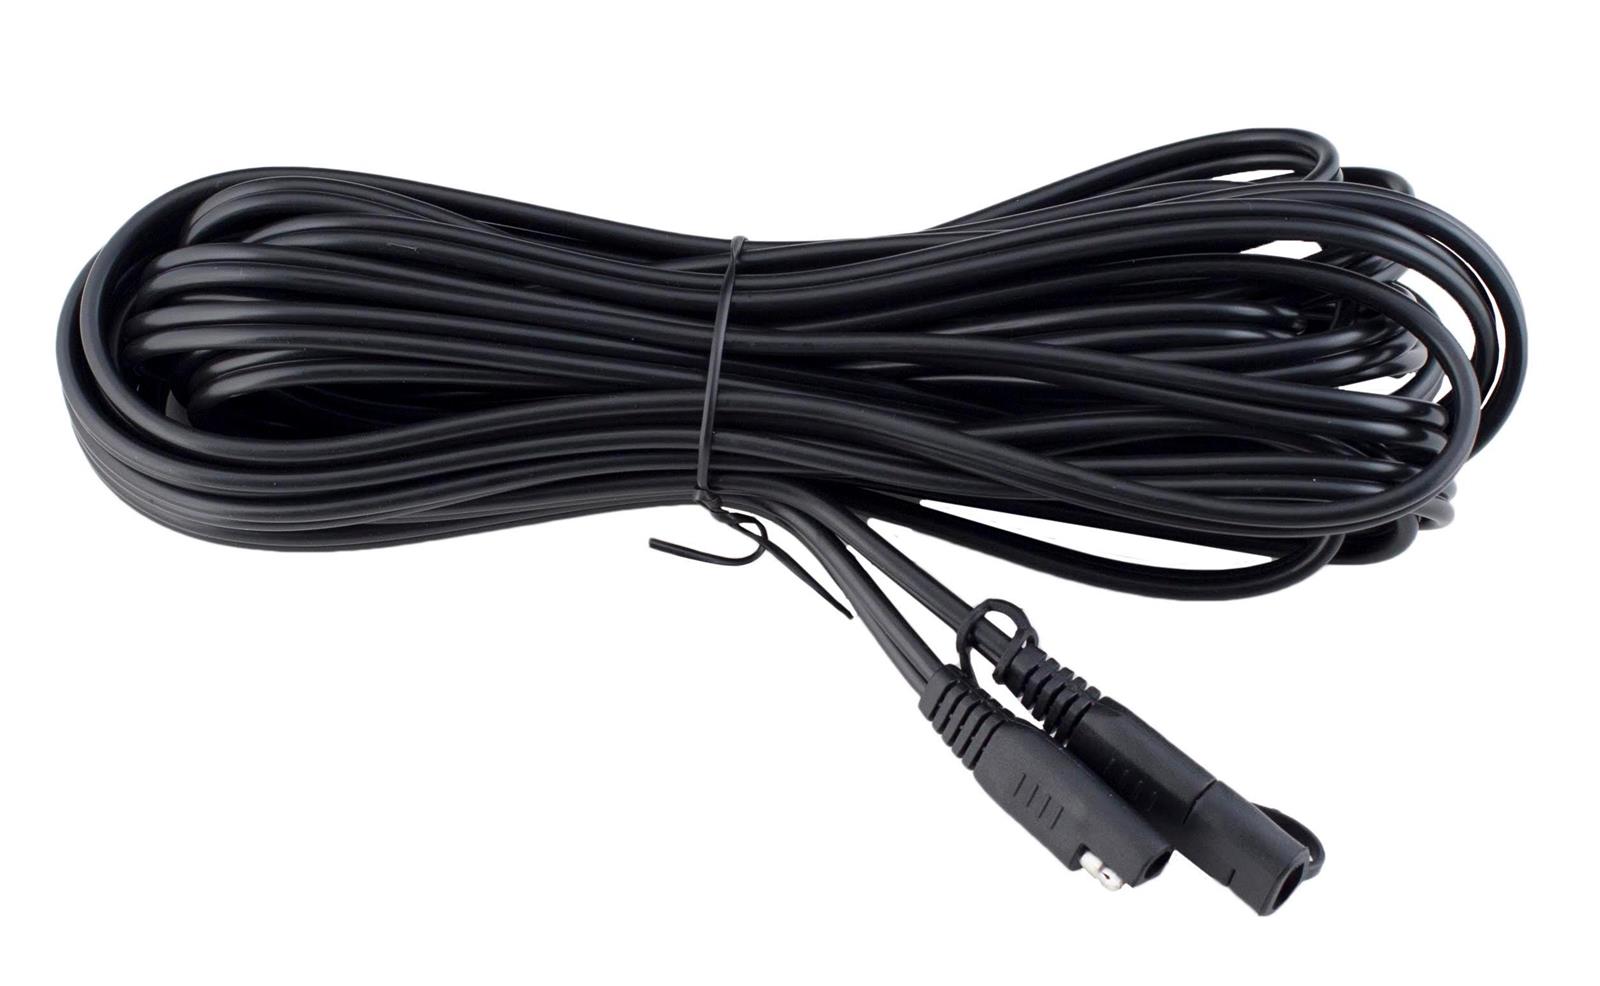 Battery Tender 08101486 Snap Cord Extension Cables 6ft. 